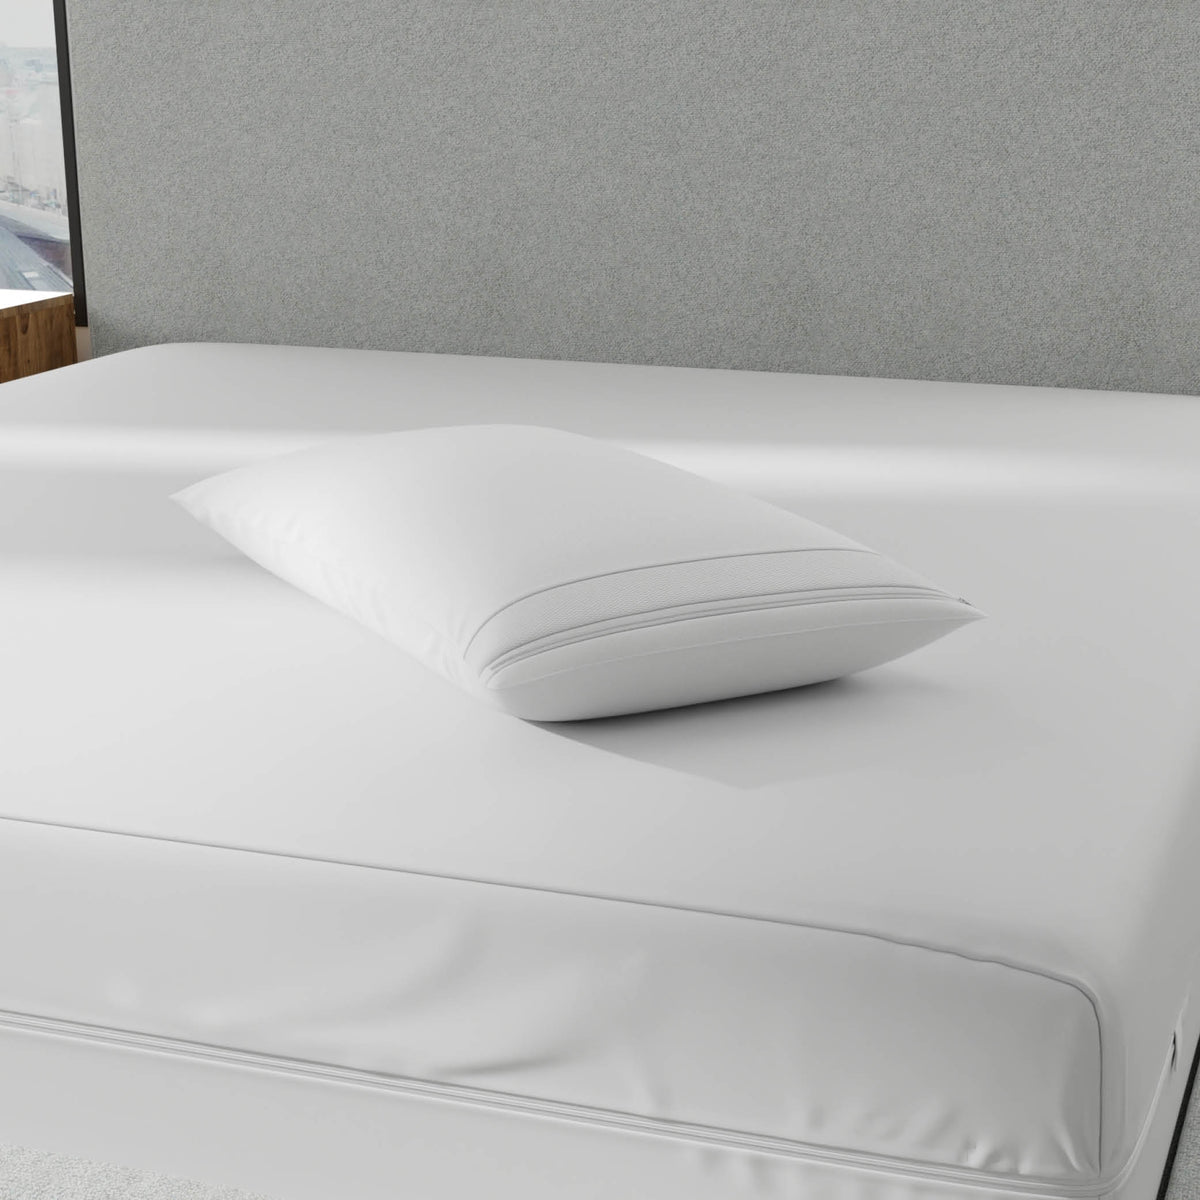 Image of a pillow with a white pillow protector on it laying on top of a bed with a gray headboard and white mattress protector on it